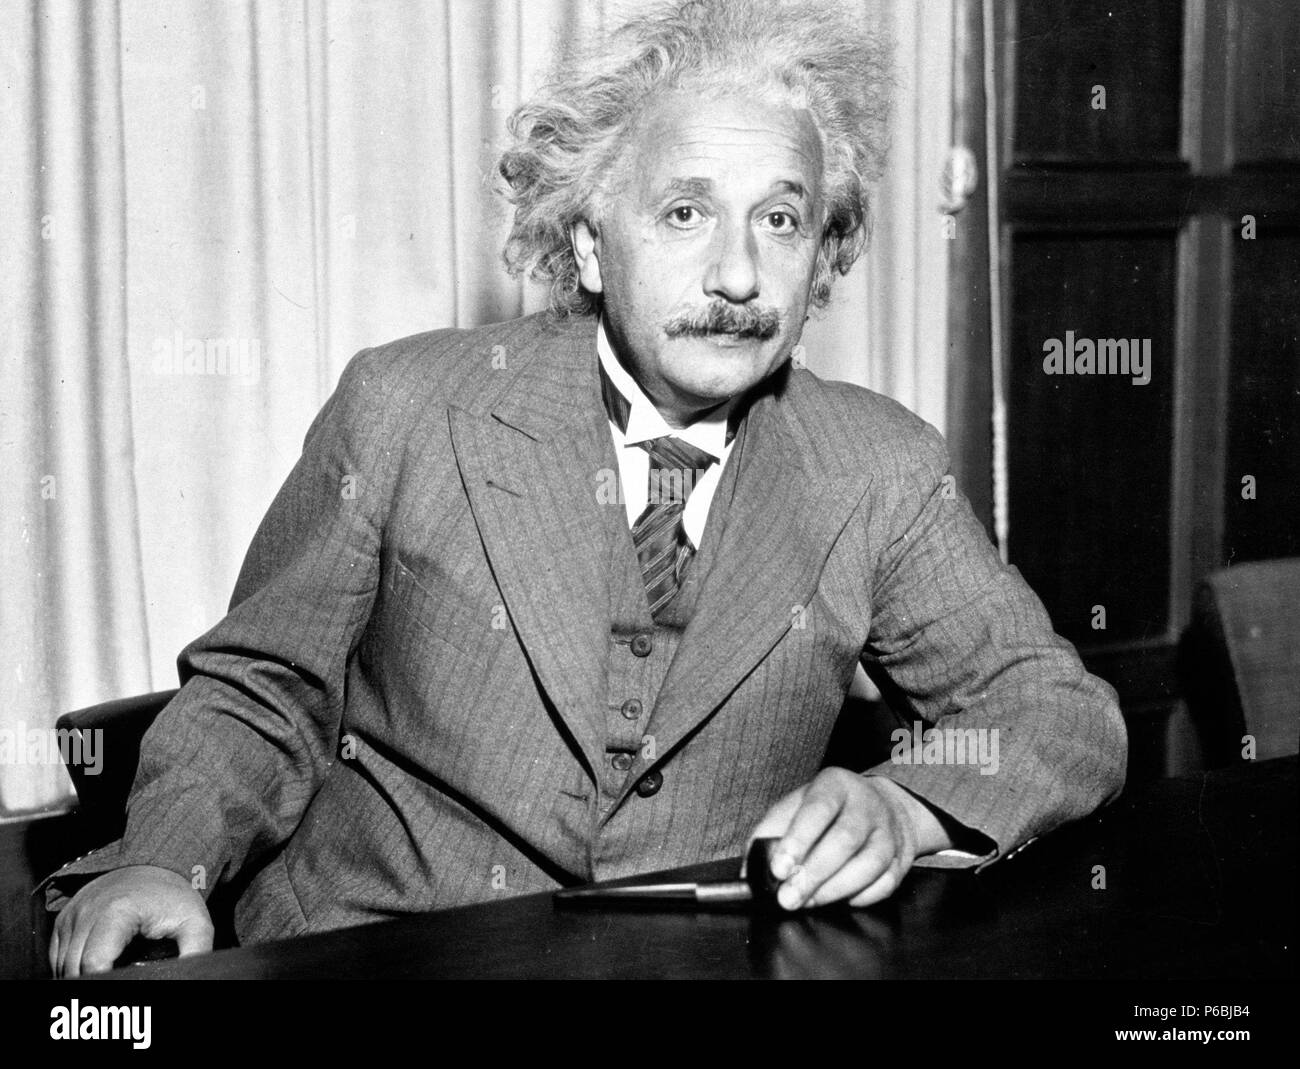 Albert Einstein (1879-1955), German-bron theoretical physicist who developed the general theory of relativity. Stock Photo